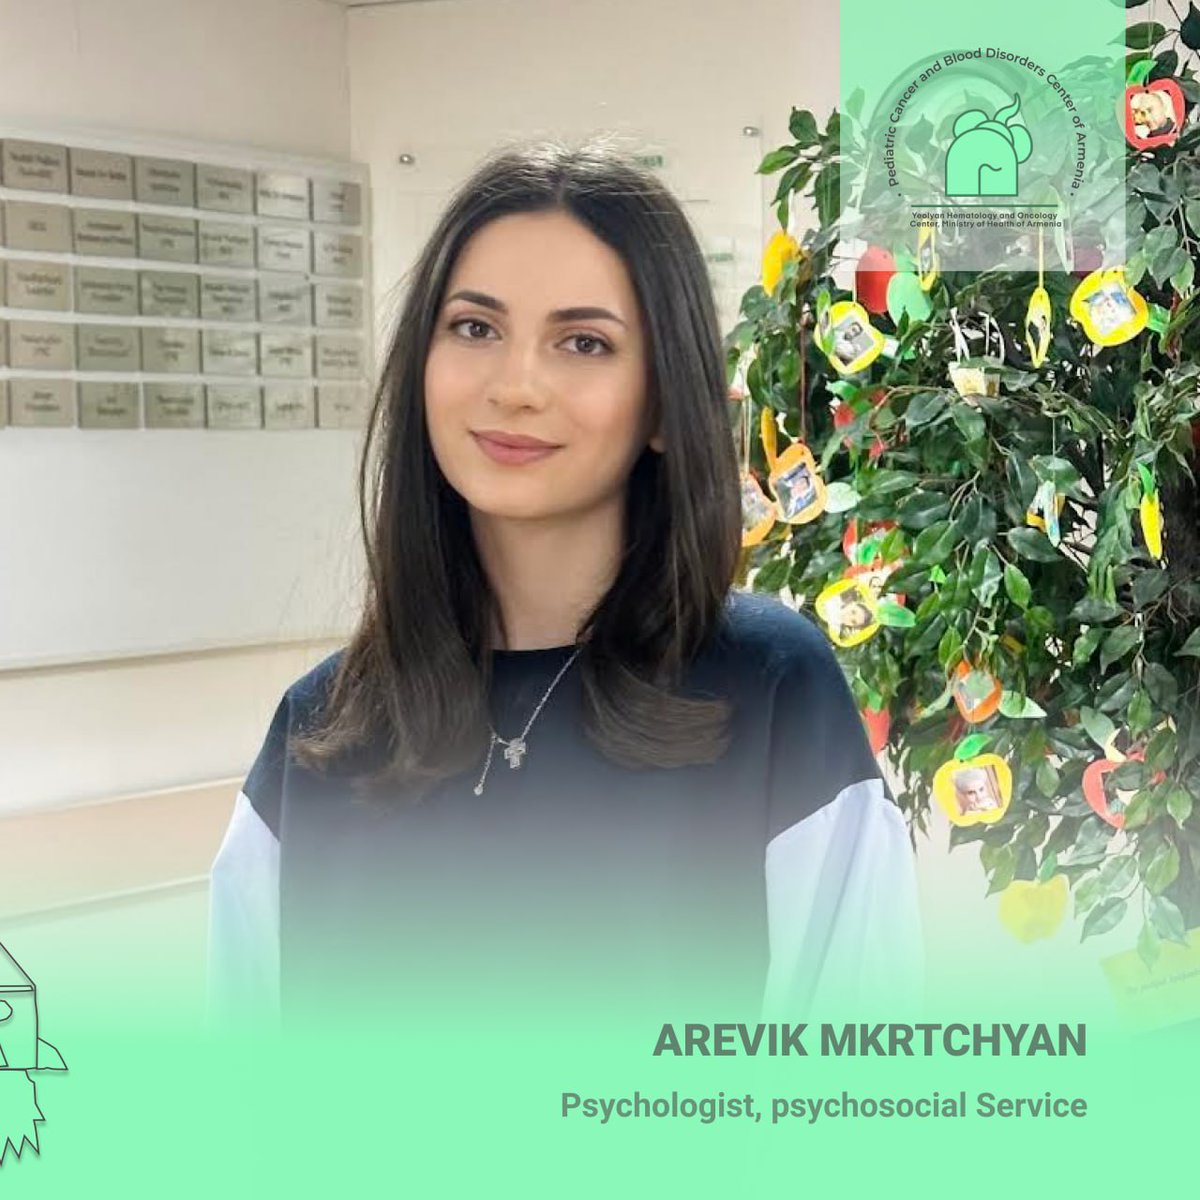 Clinical psychologist Arevik Mkrtchyan has been working at the #psychosocial service of the Pediatric Cancer and Blood Disorders Center of Armenia for about 6 years.